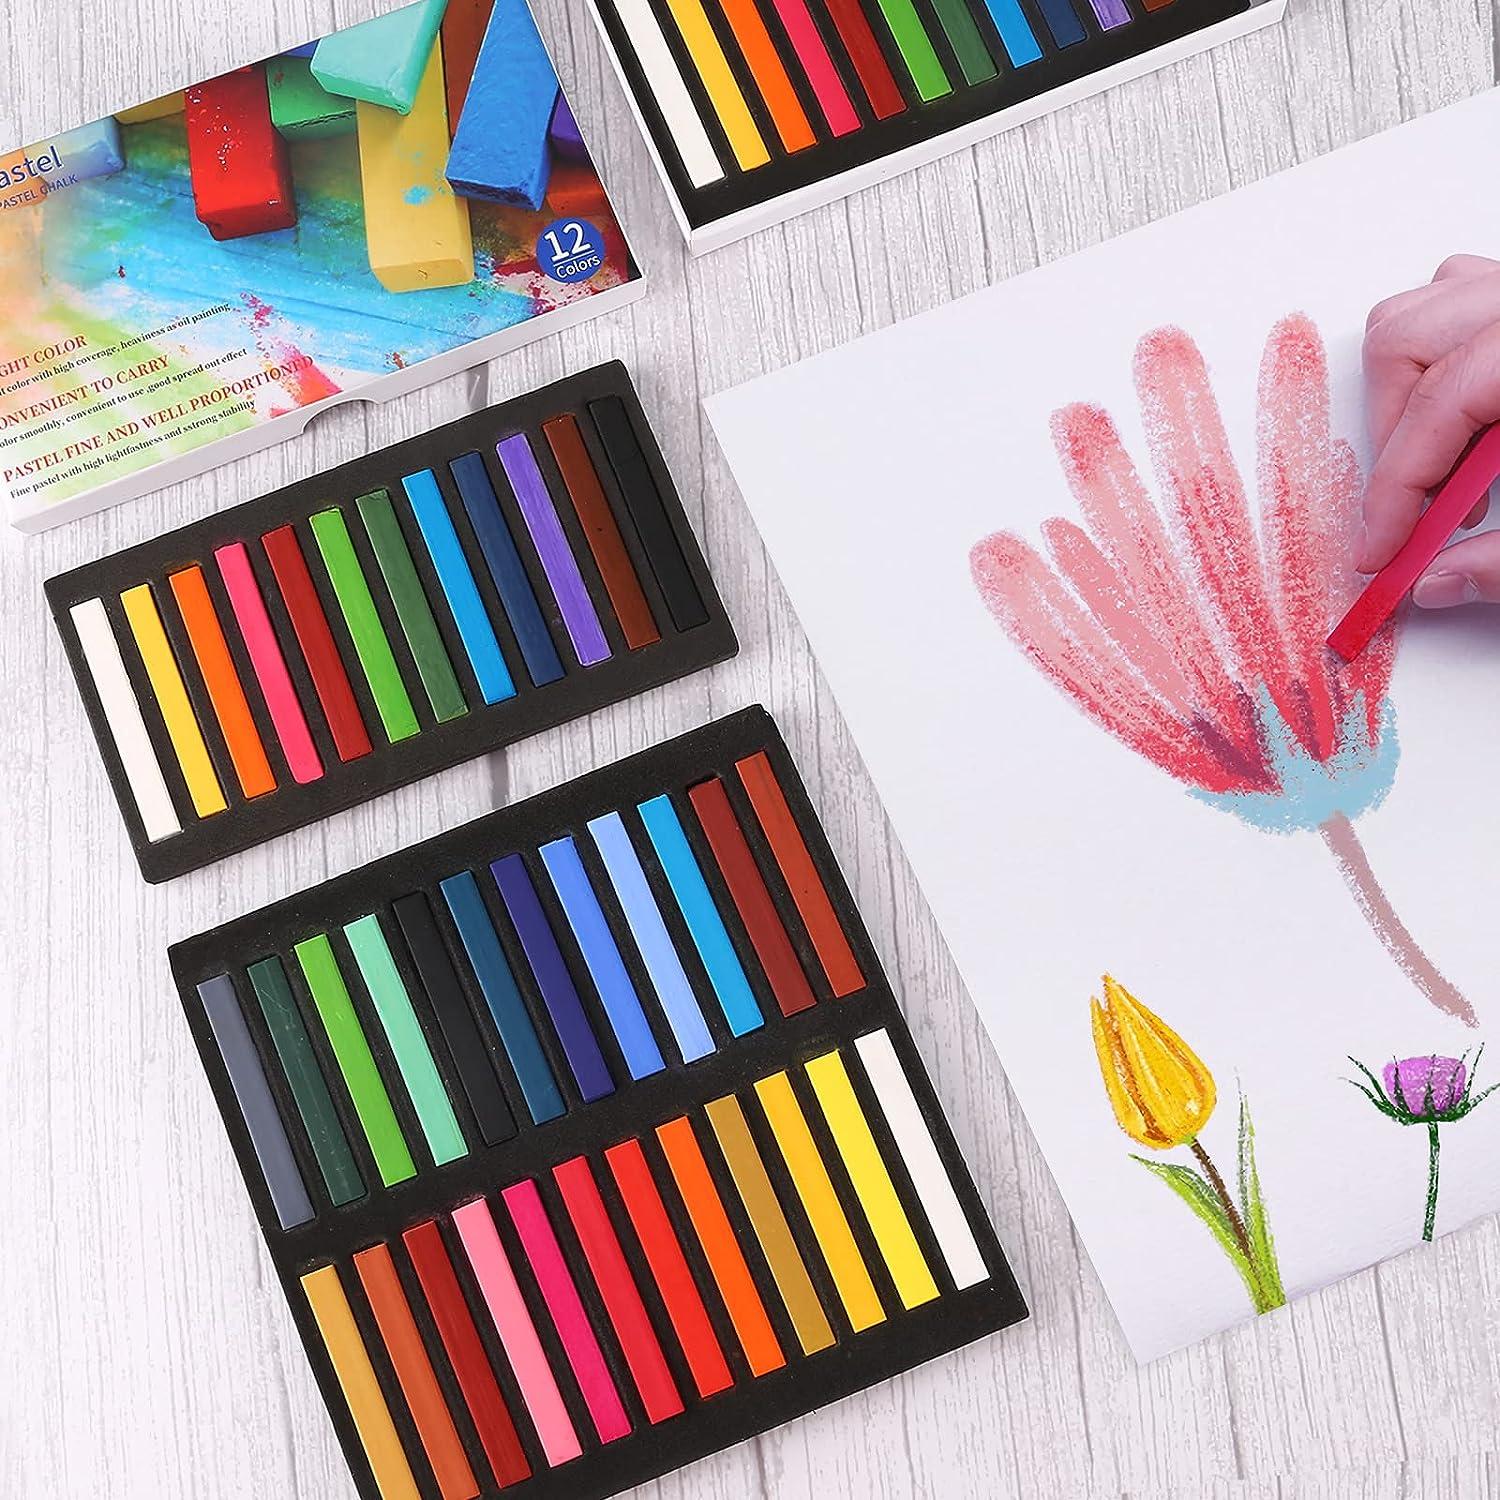 Soft Pastels vs Chalk Pastels: Are They the Same?